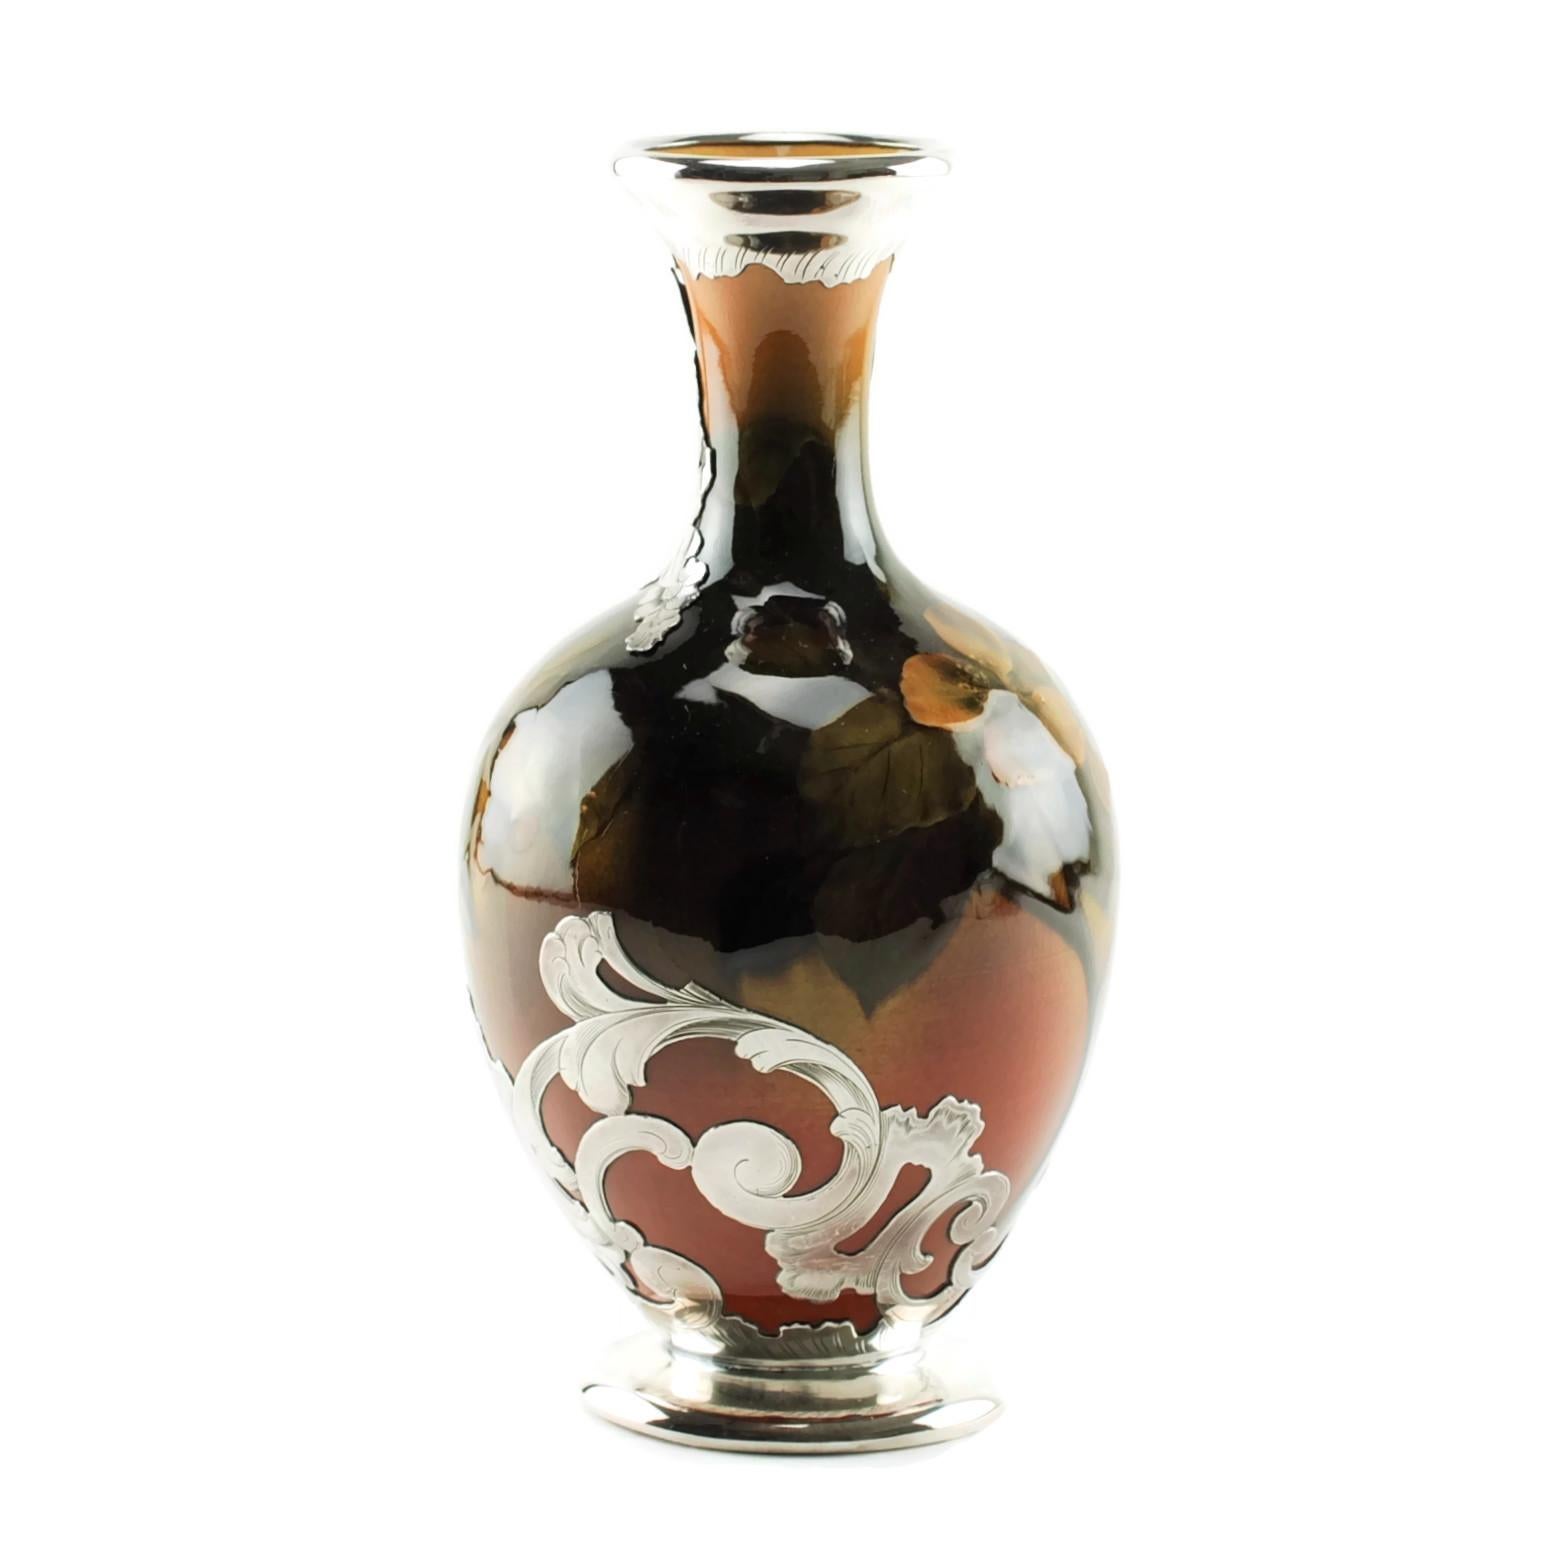 This late 19th century American art pottery vase was made by Rookwood Pottery of Cincinnati, Ohio. The 7.5